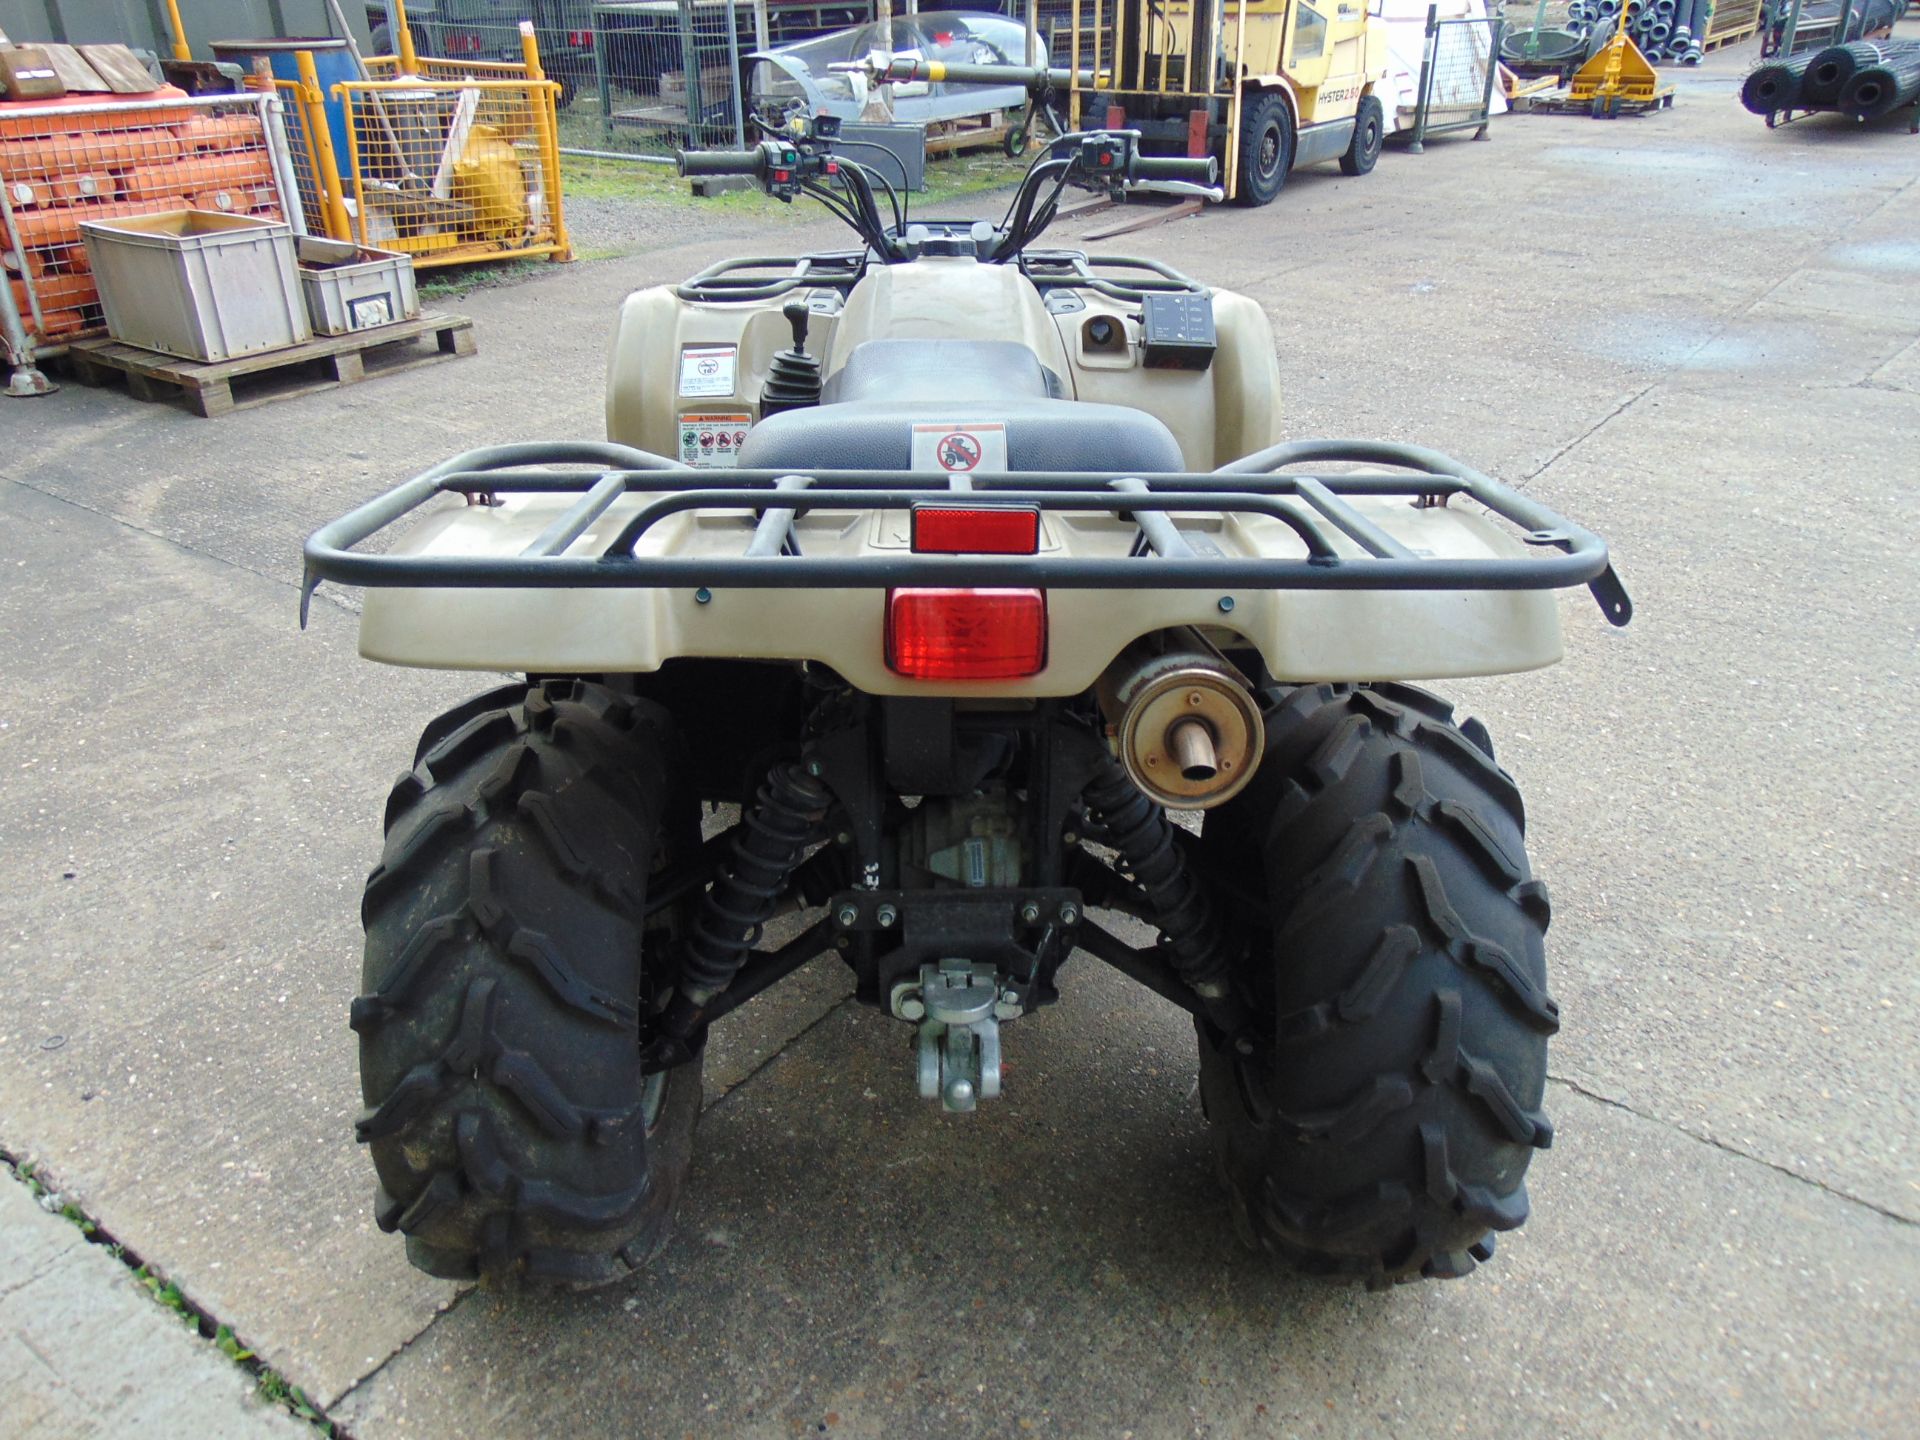 Military Specification Yamaha Grizzly 450 4 x 4 ATV Quad Bike Complete with Winch 591 Hours Only! - Image 7 of 16